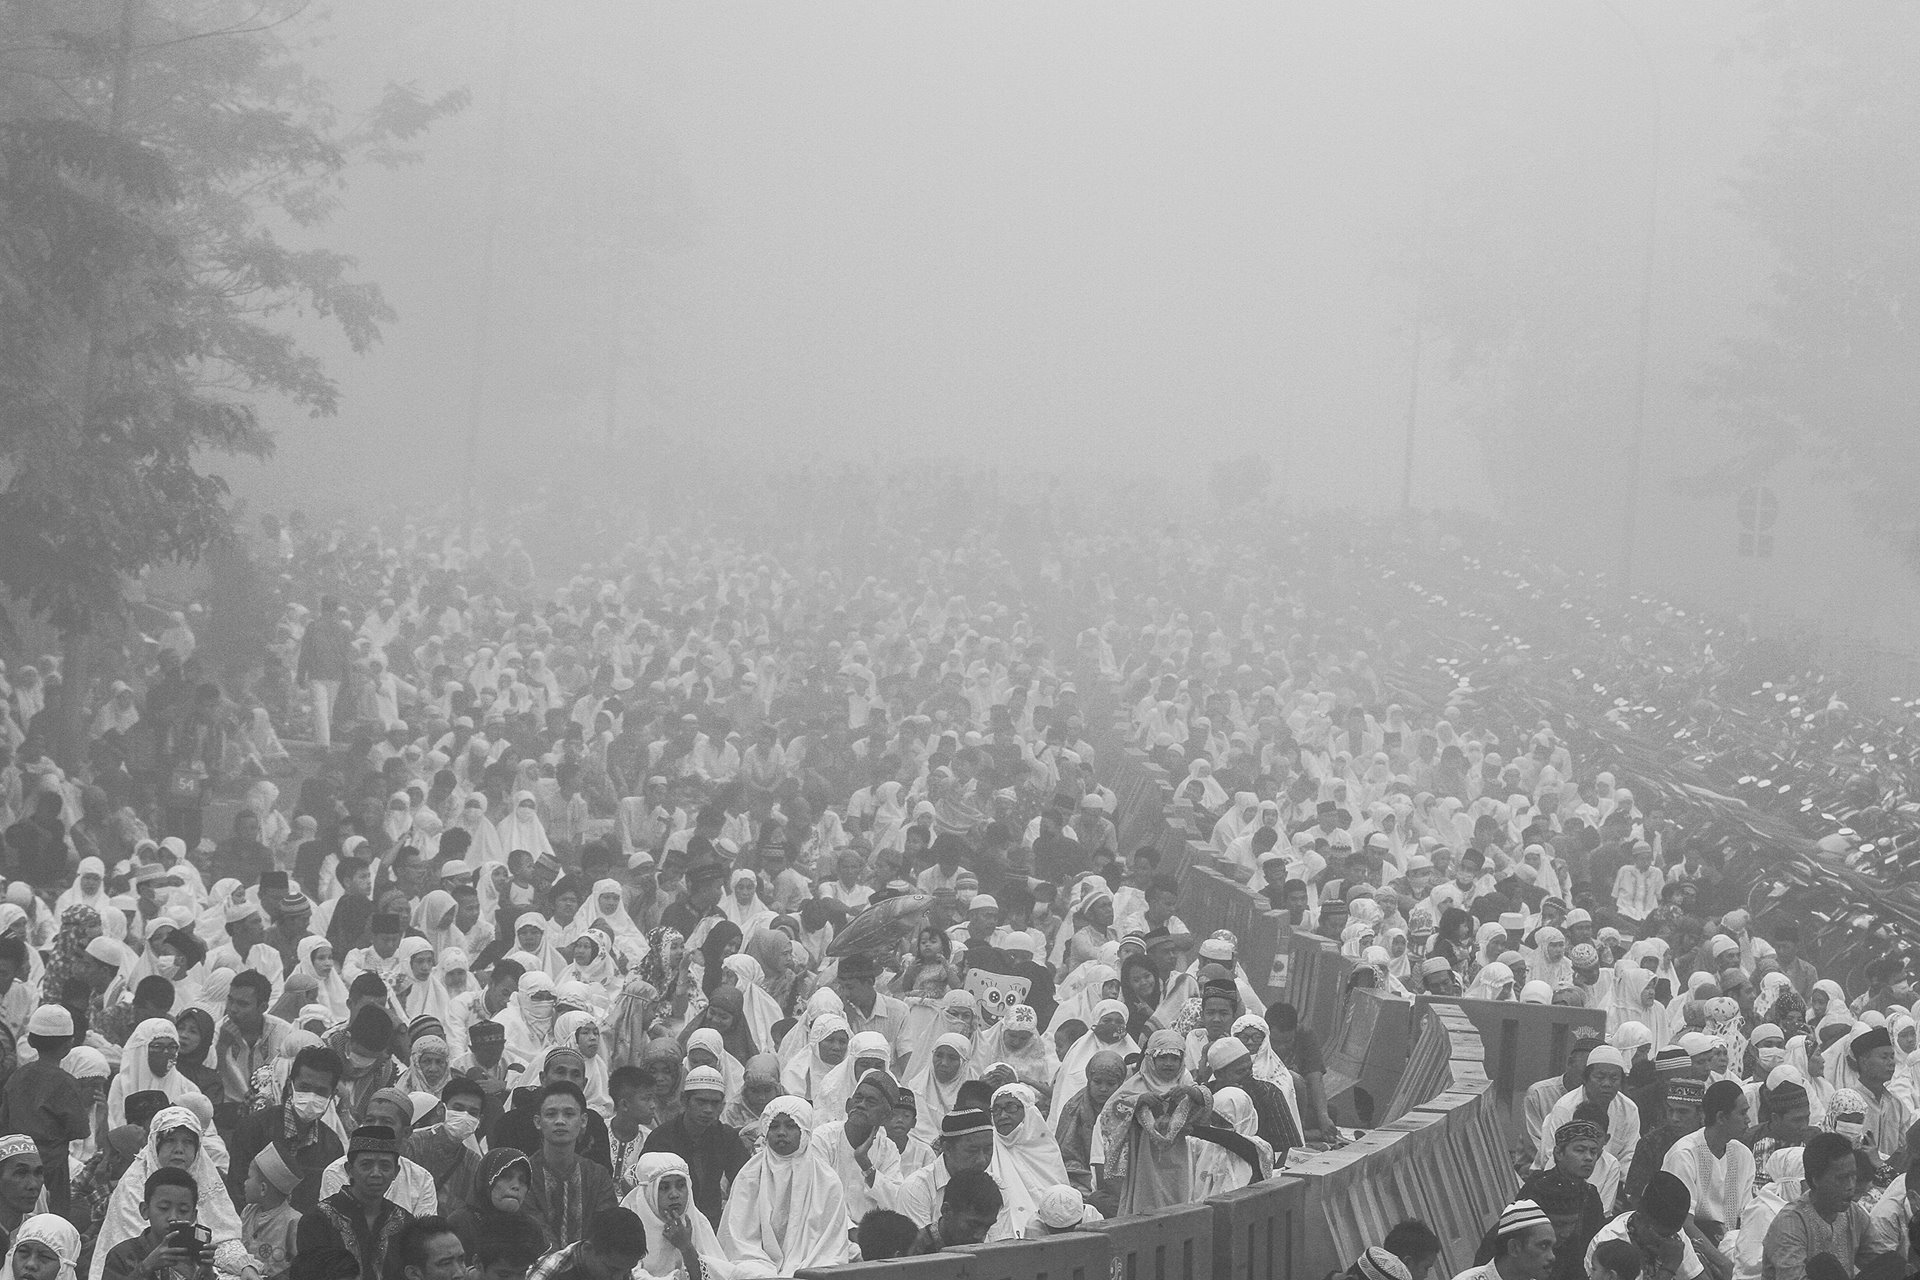 <p>People gather during the Muslim festival of Eid al-Adha in Palembang, Indonesia. Smog from forest fires had pushed air quality to unhealthy levels, prompting the cancellation of flights and warnings for people to stay indoors.</p>
